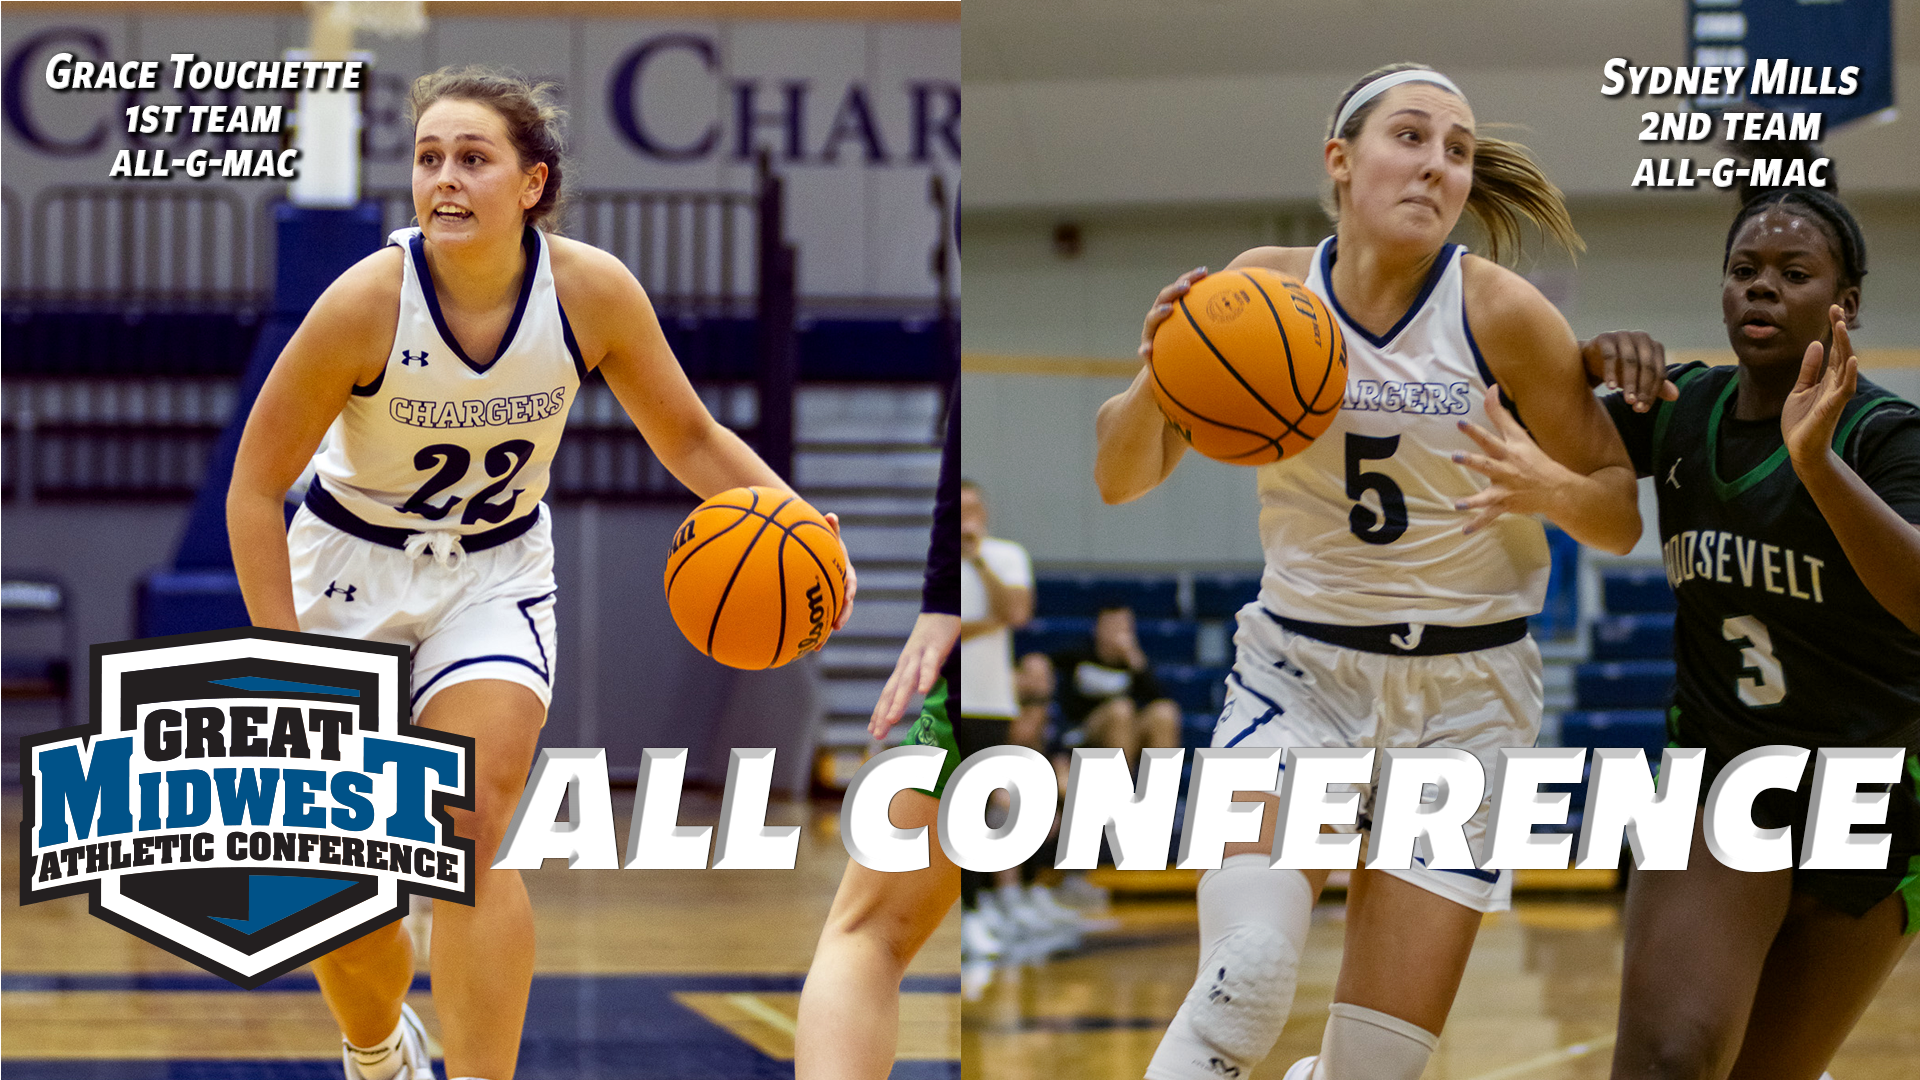 Chargers Grace Touchette, Sydney Mills earn repeat All-Conference honors from the G-MAC